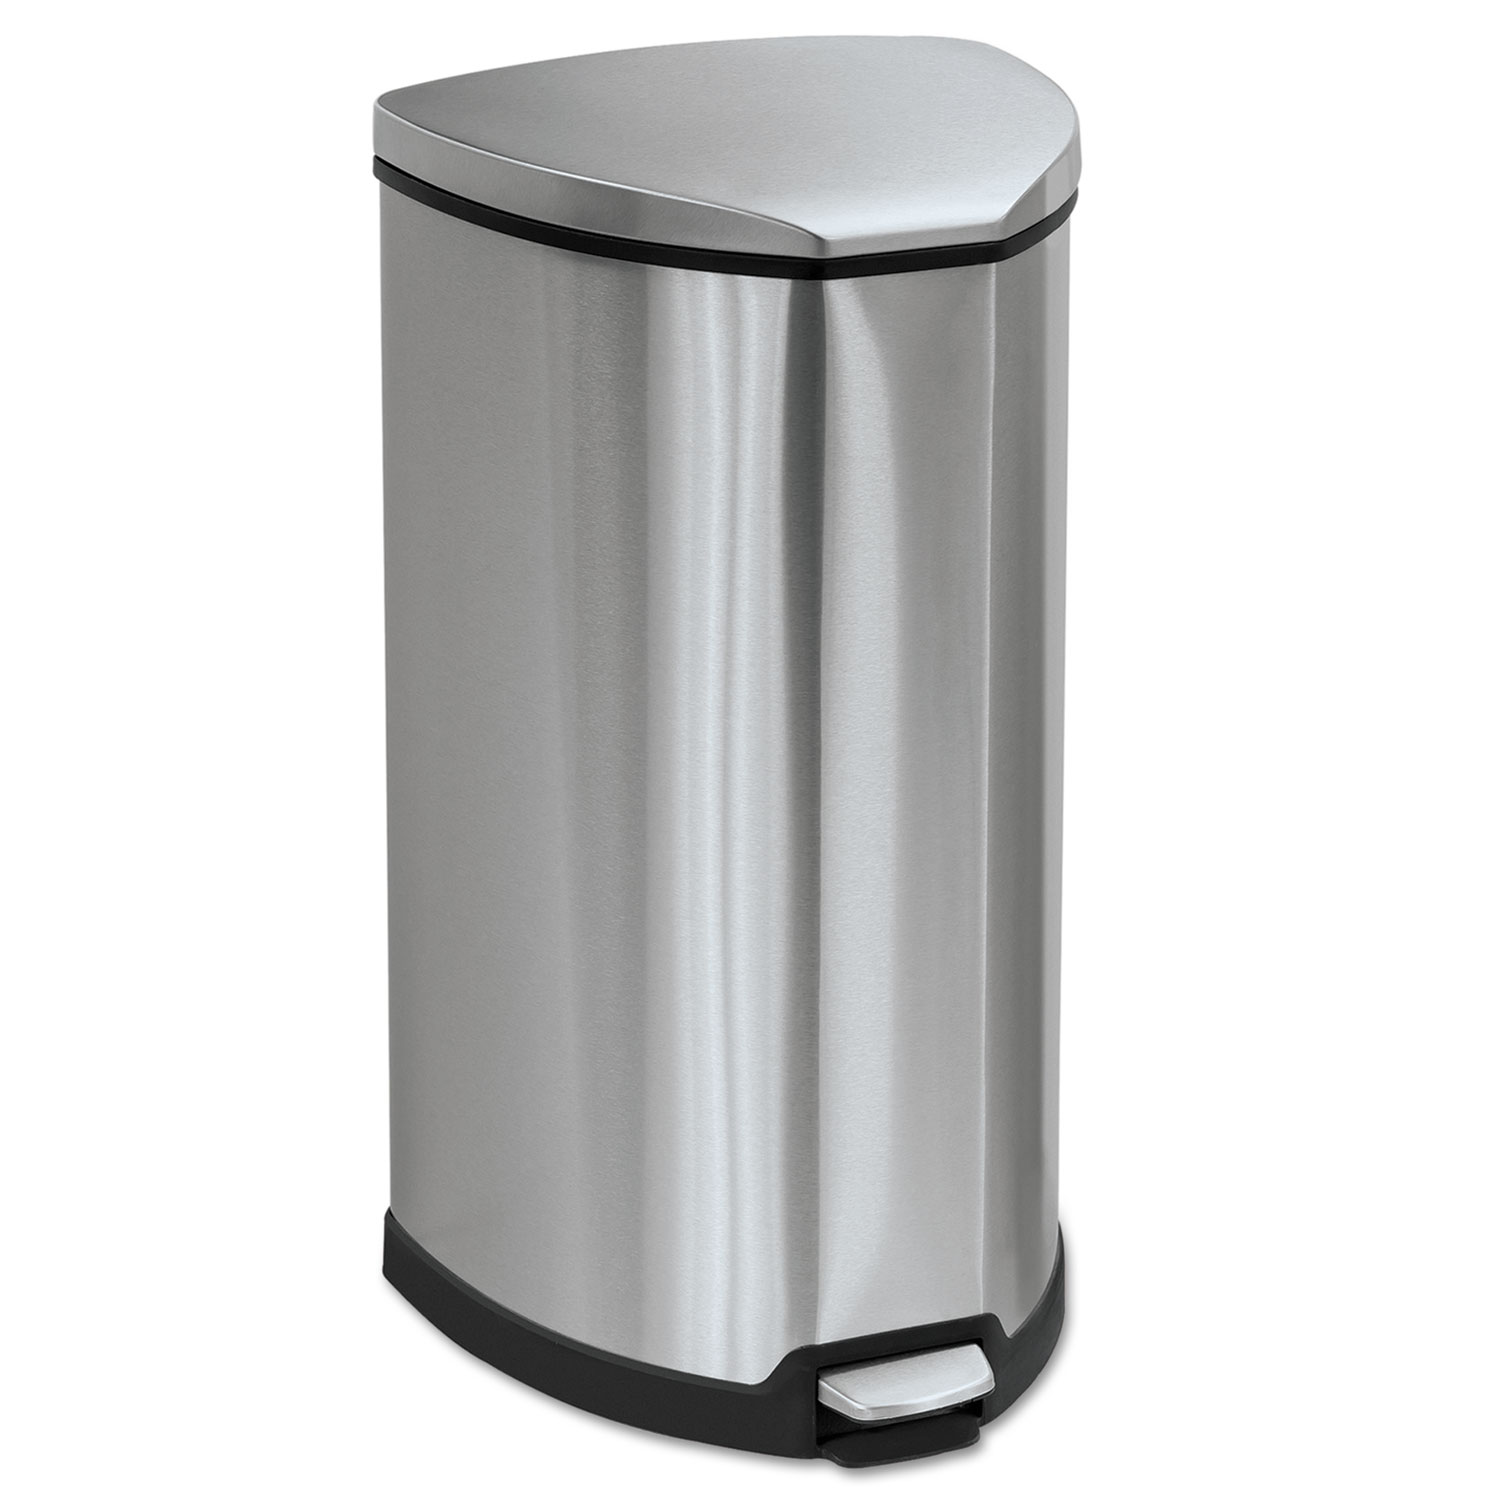  Safco 9687SS Step-On Waste Receptacle, Triangular, Stainless Steel, 10 gal, Chrome/Black (SAF9687SS) 